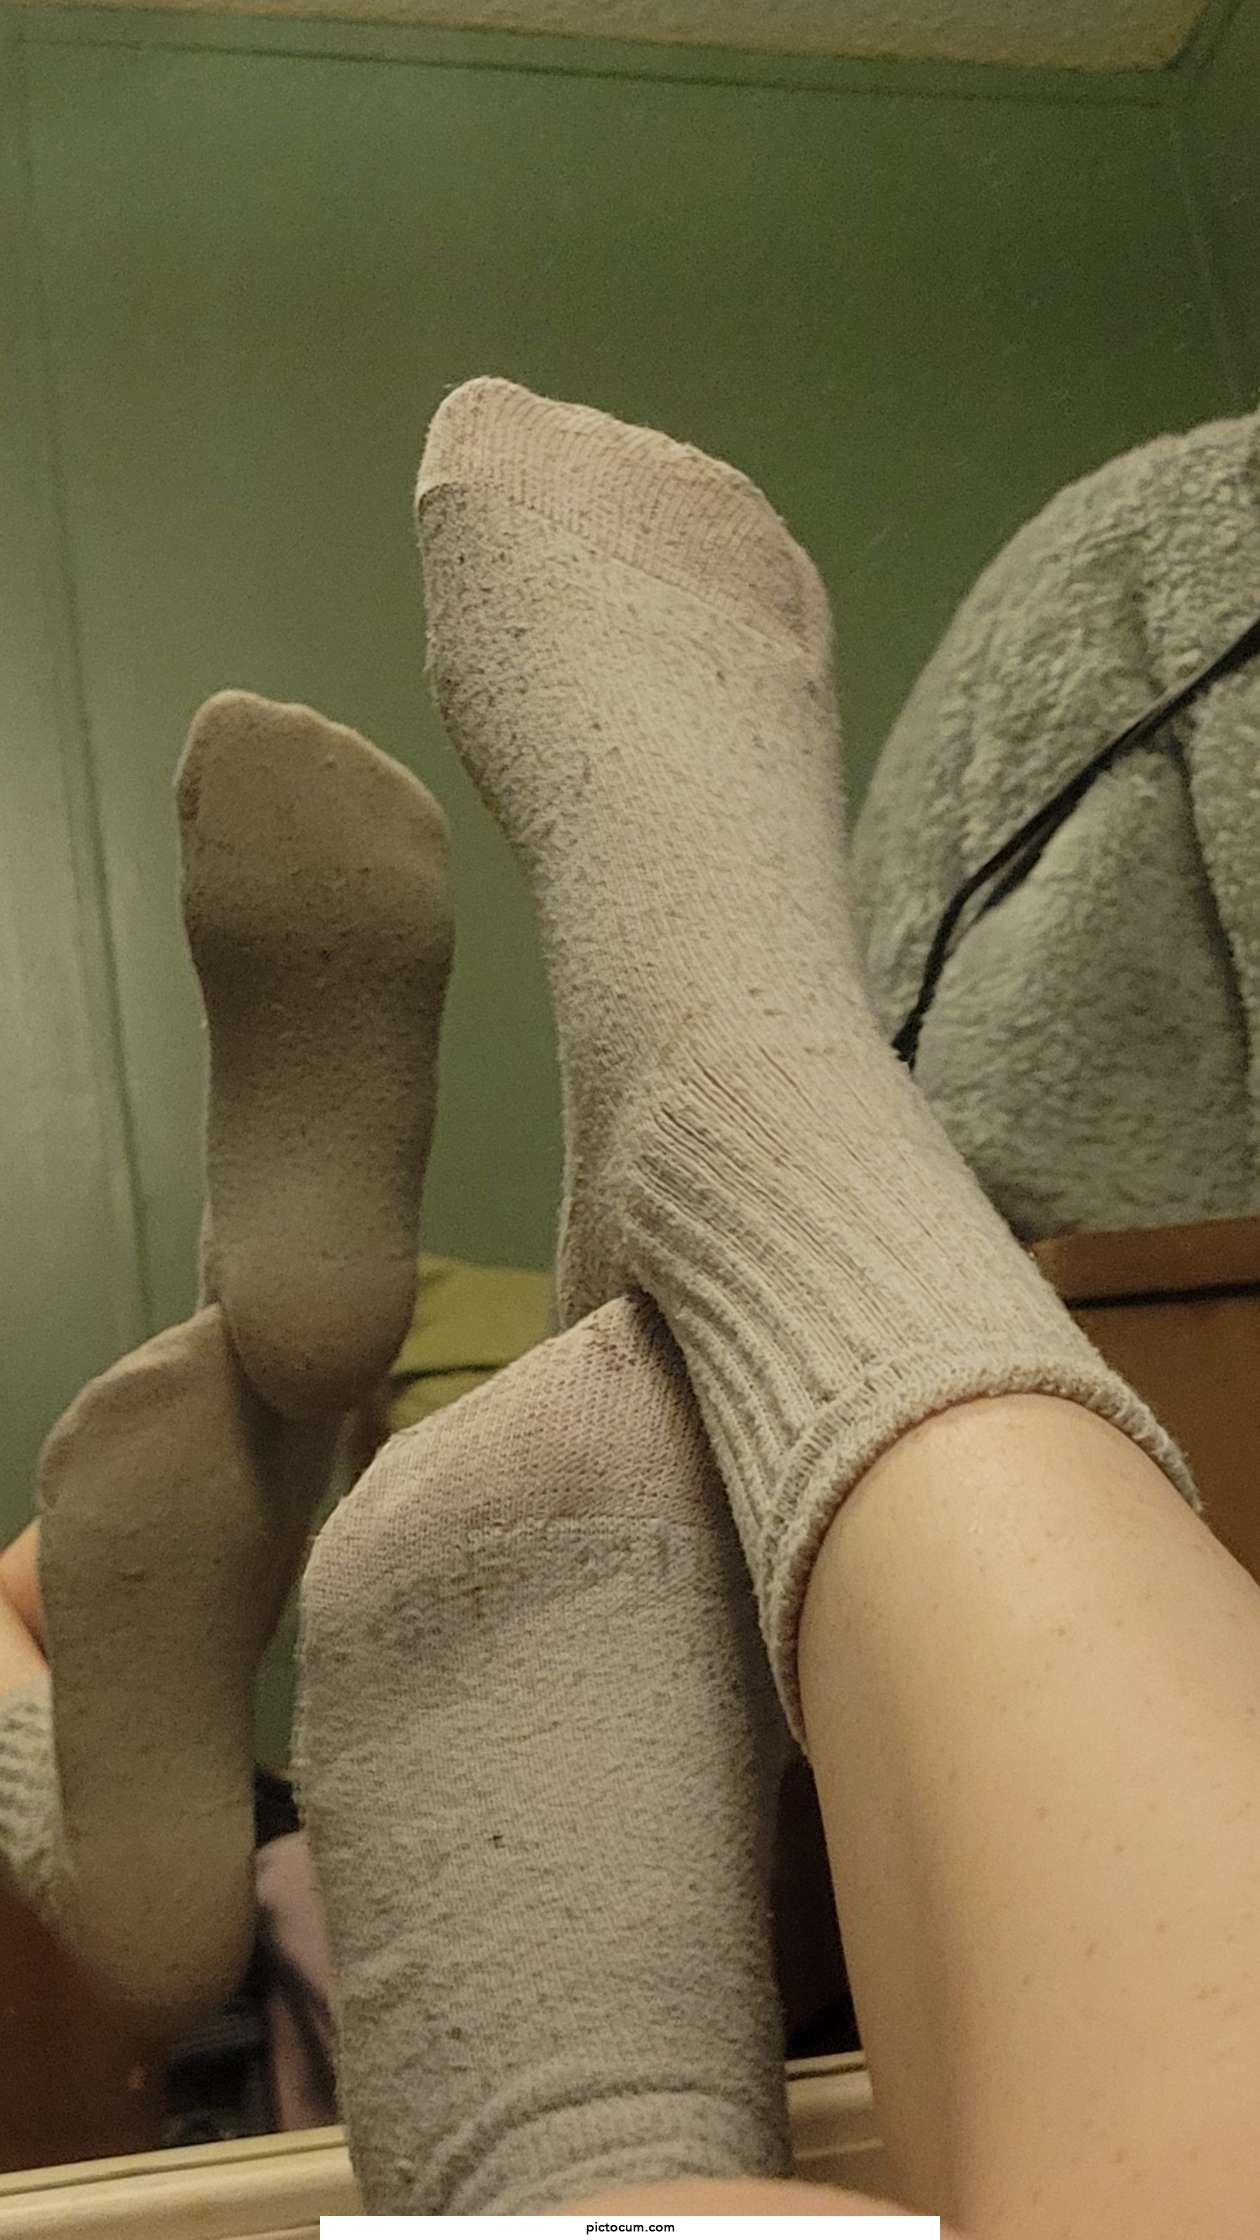 I bet you’re Begging to smell my used socks? OC